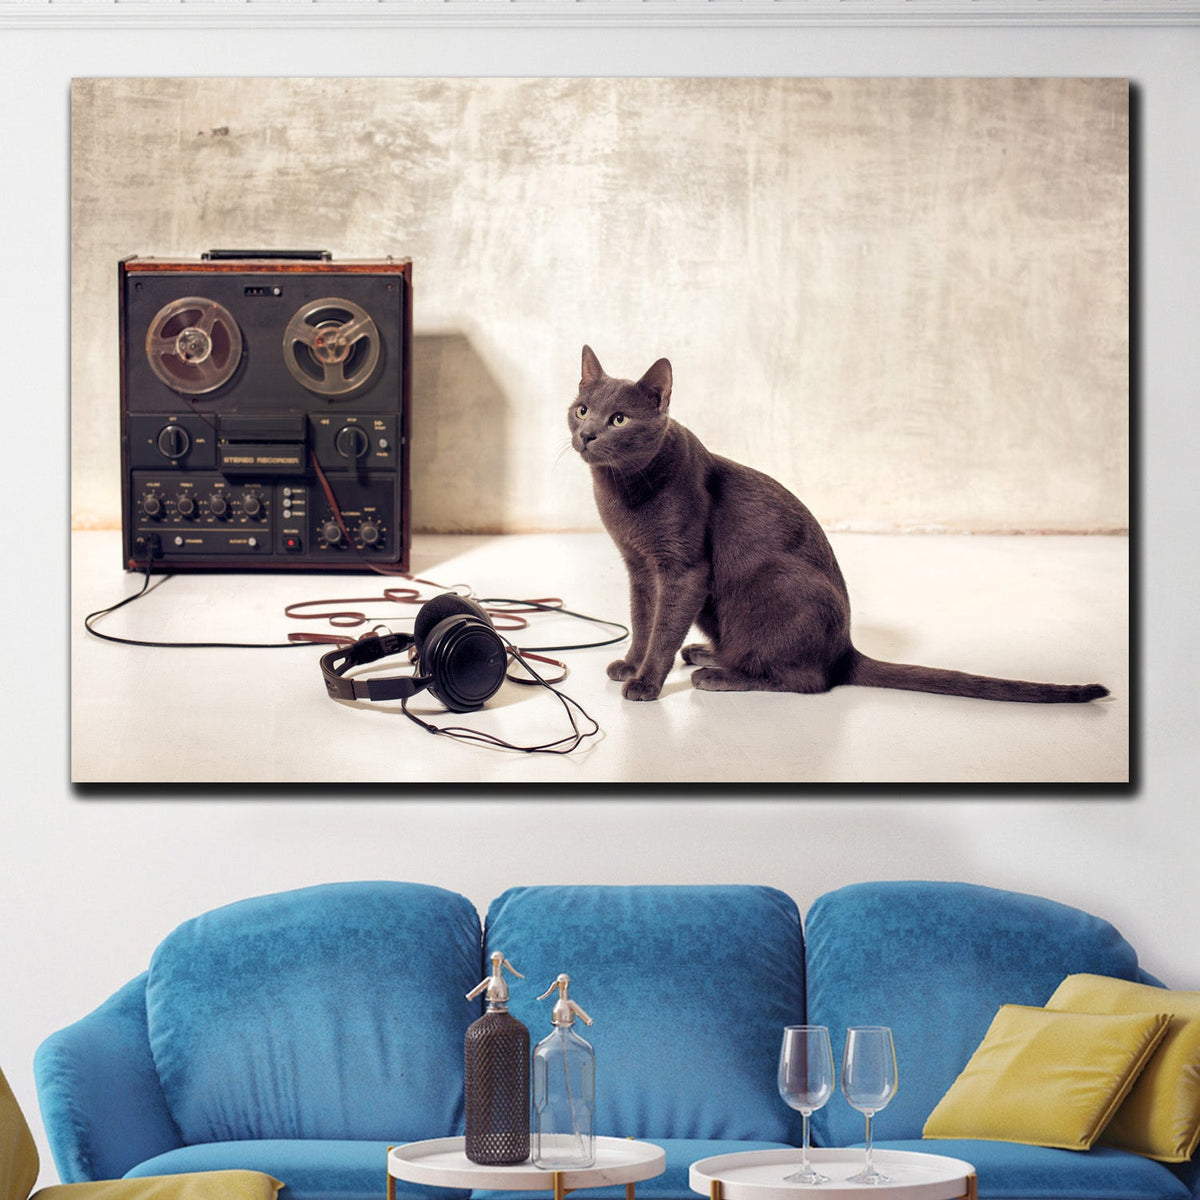 https://cdn.shopify.com/s/files/1/0387/9986/8044/products/HipsterCatandMagnetophonCanvasArtprintStretched-2.jpg